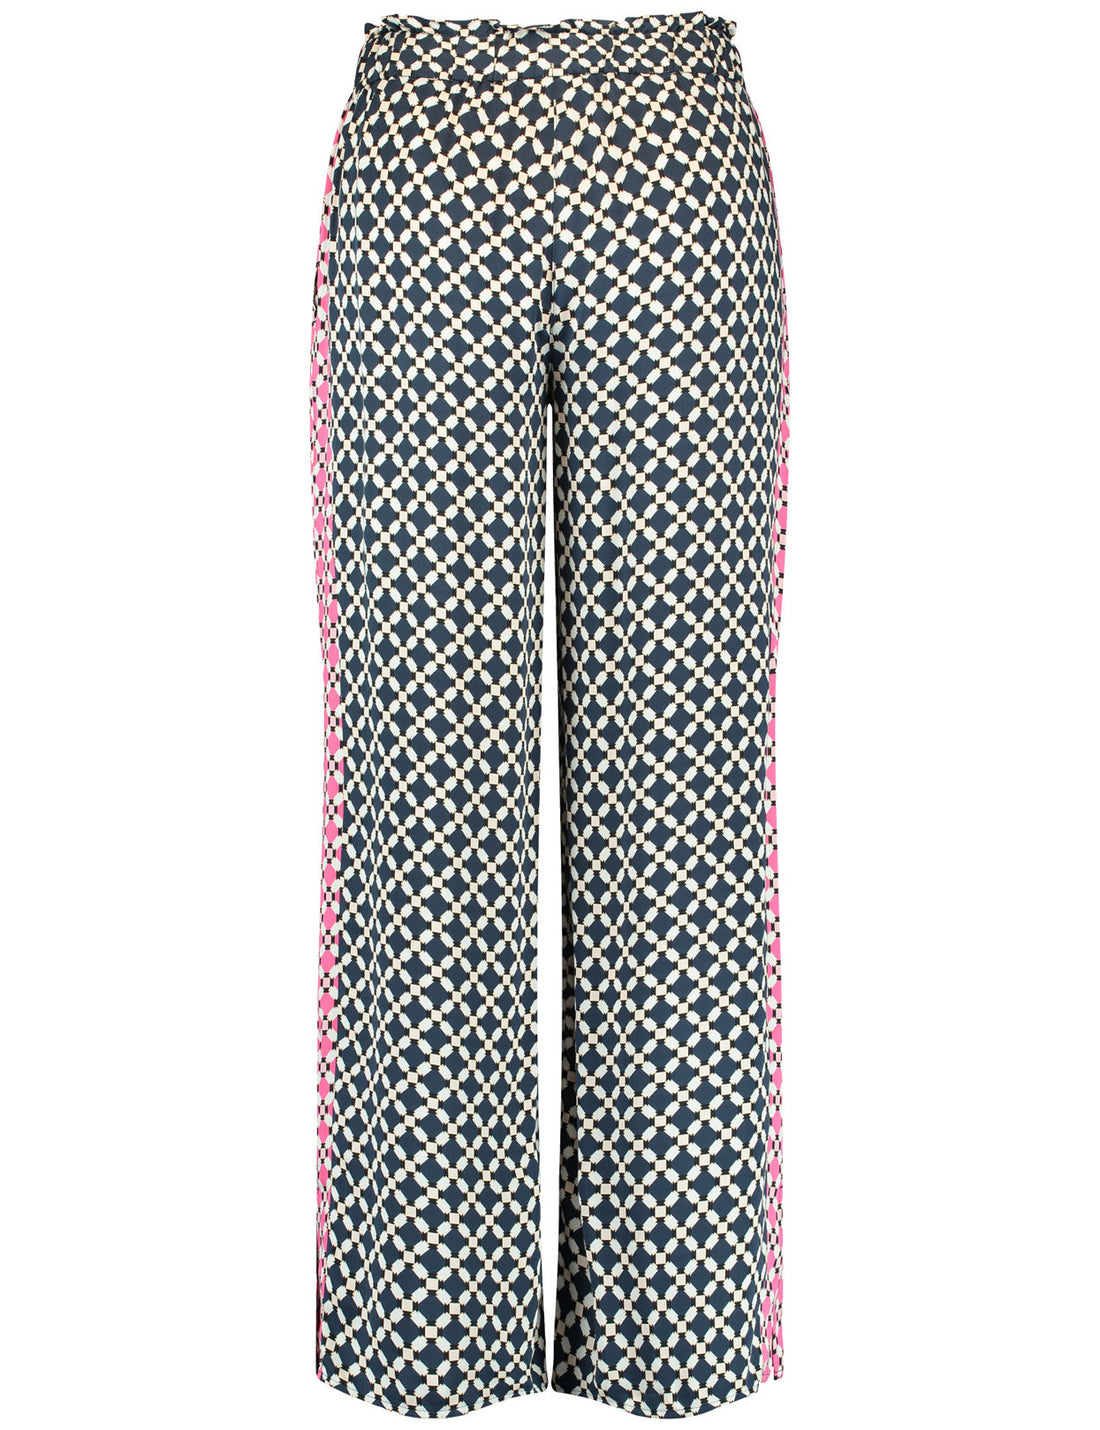 Slip On Trousers With All Over Print_222209-66430_3099_02